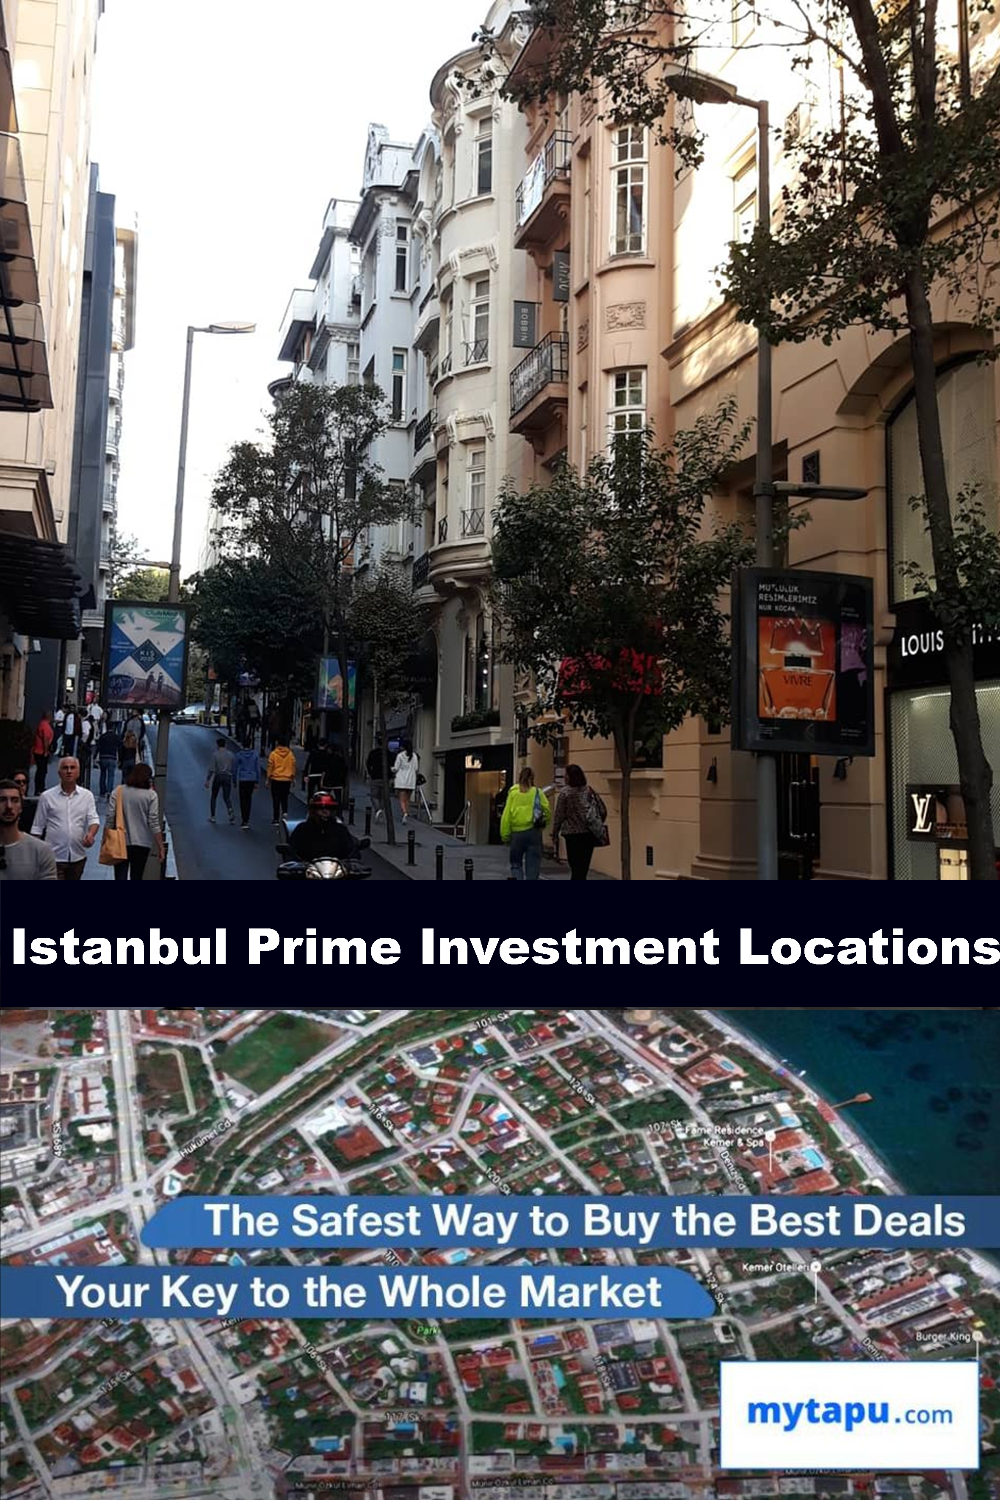 Exclusive Luxury Property for Investment in Prime Central Istanbul Locations